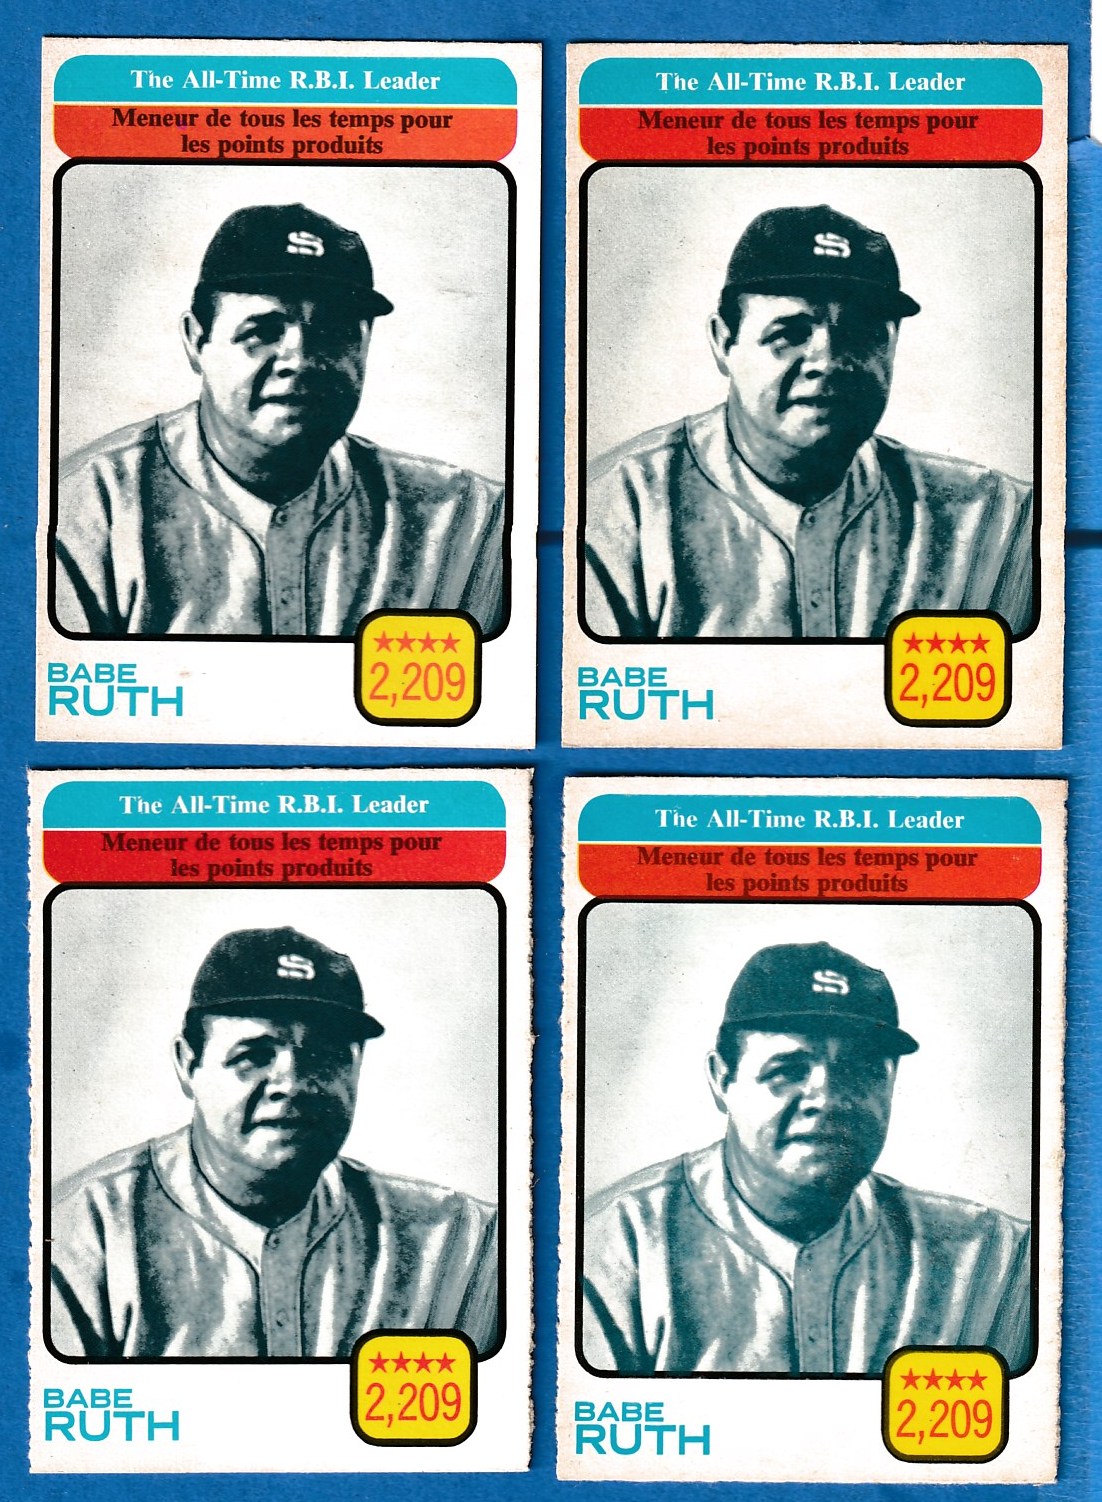 1973 O-Pee-Chee/OPC #474 Babe Ruth All-Time Leaders (2,209 RBIs) (Yankees) Baseball cards value